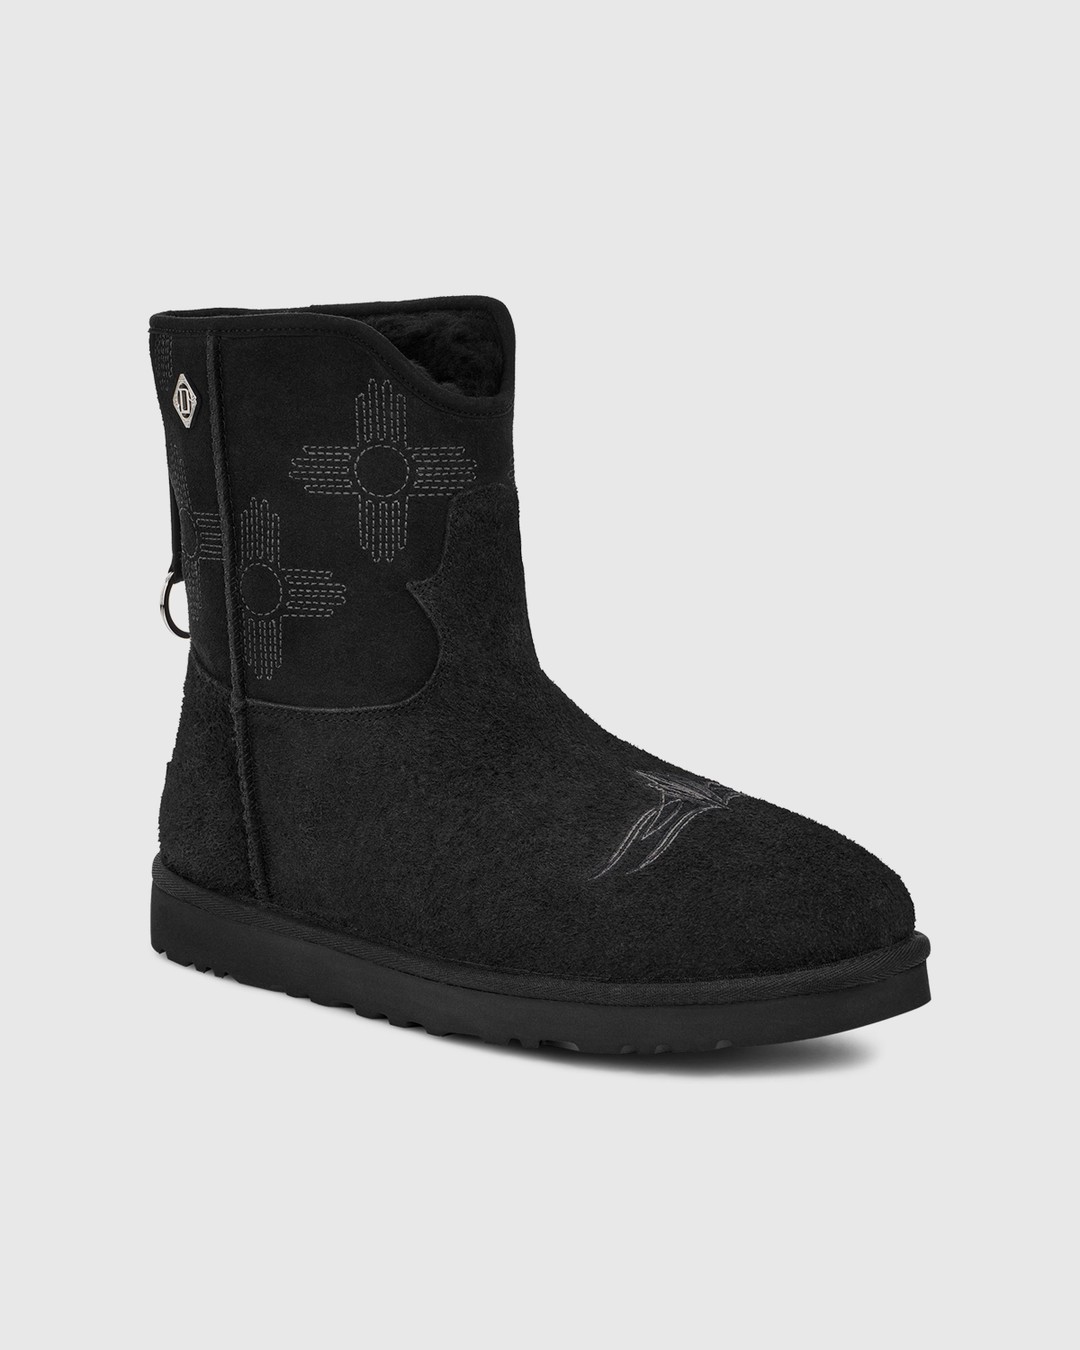 Ugg x Children of the Discordance – Classic Short Boot Black - Lined Boots - Black - Image 3